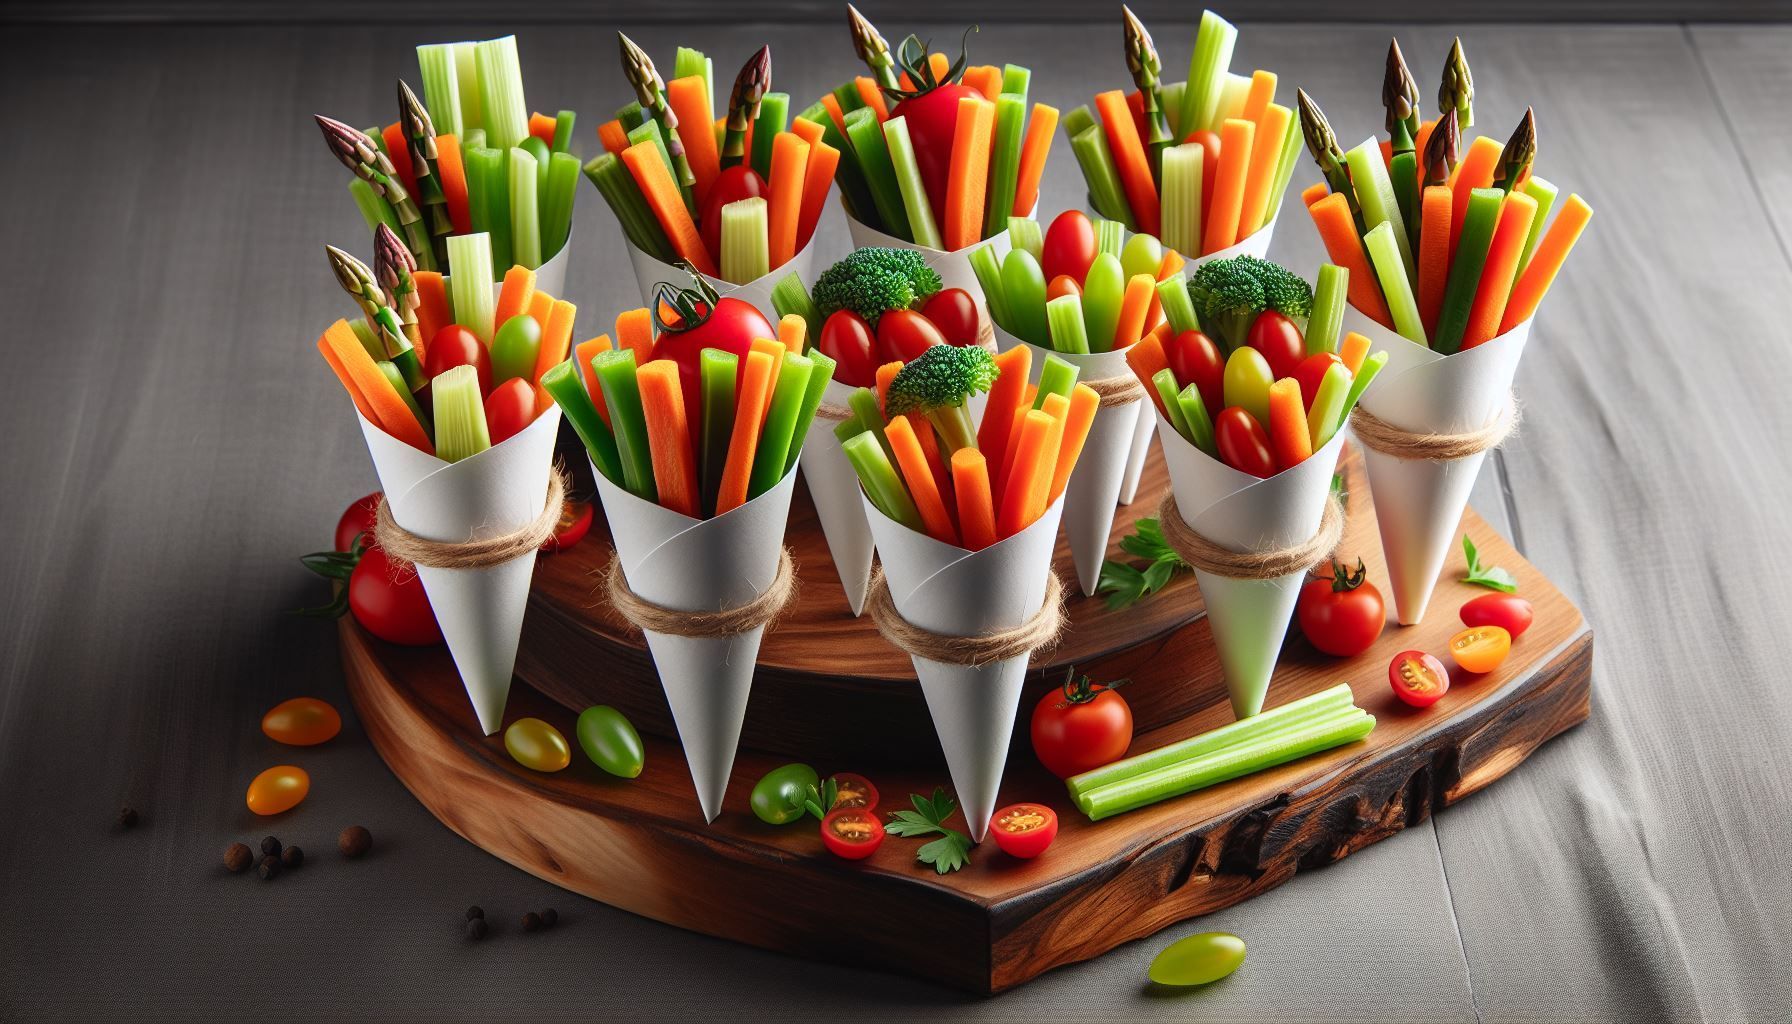 A wooden cutting board topped with paper cones filled with vegetables.